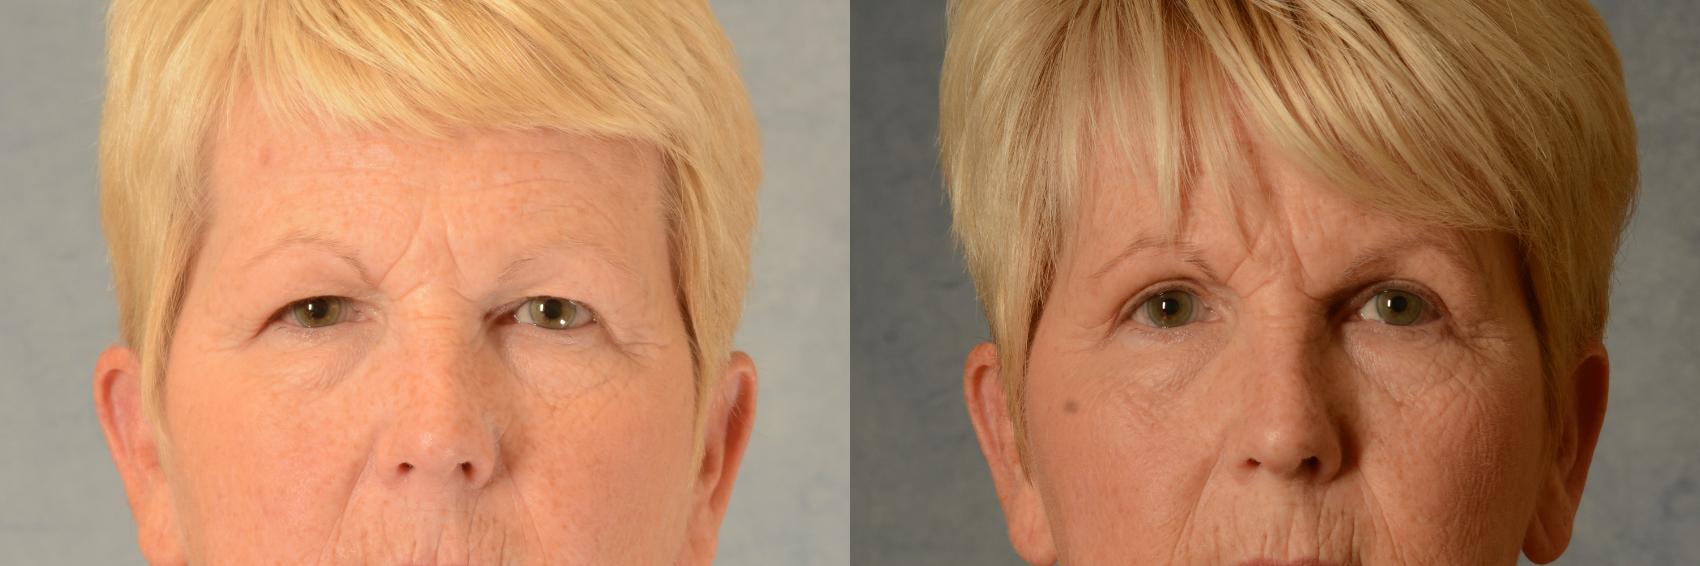 Before & After Eyelid Surgery (Blepharoplasty) Case 512 Front View in Tallahassee, FL